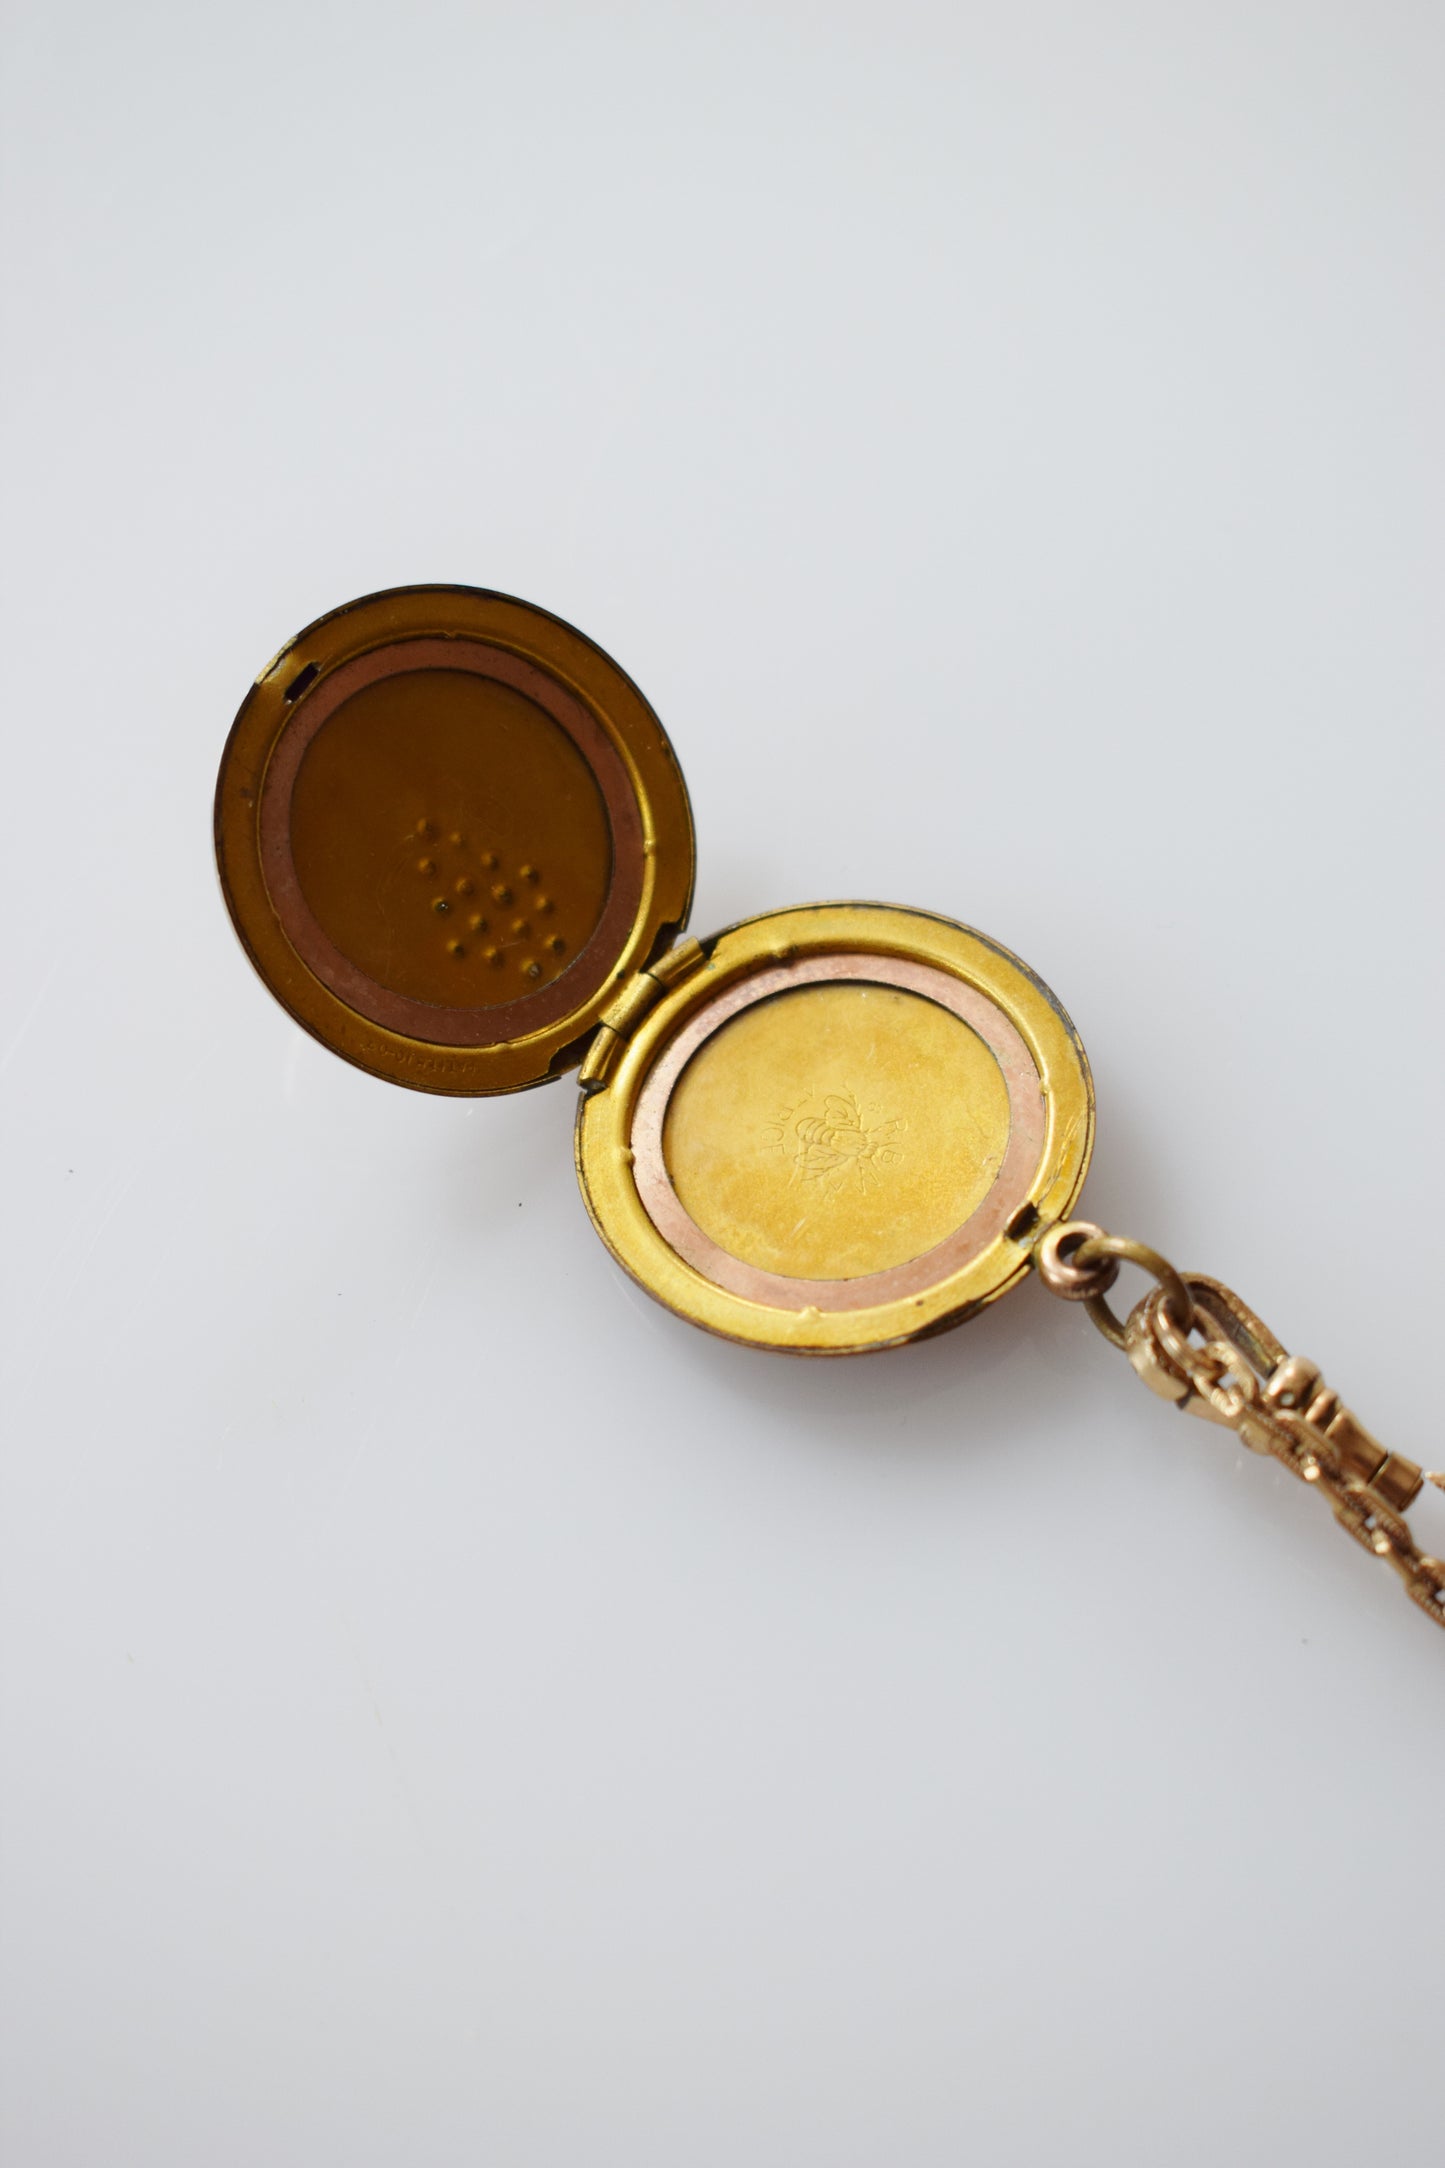 Antique Gold-Filled Grape Cluster Locket with Deco Fob Chain